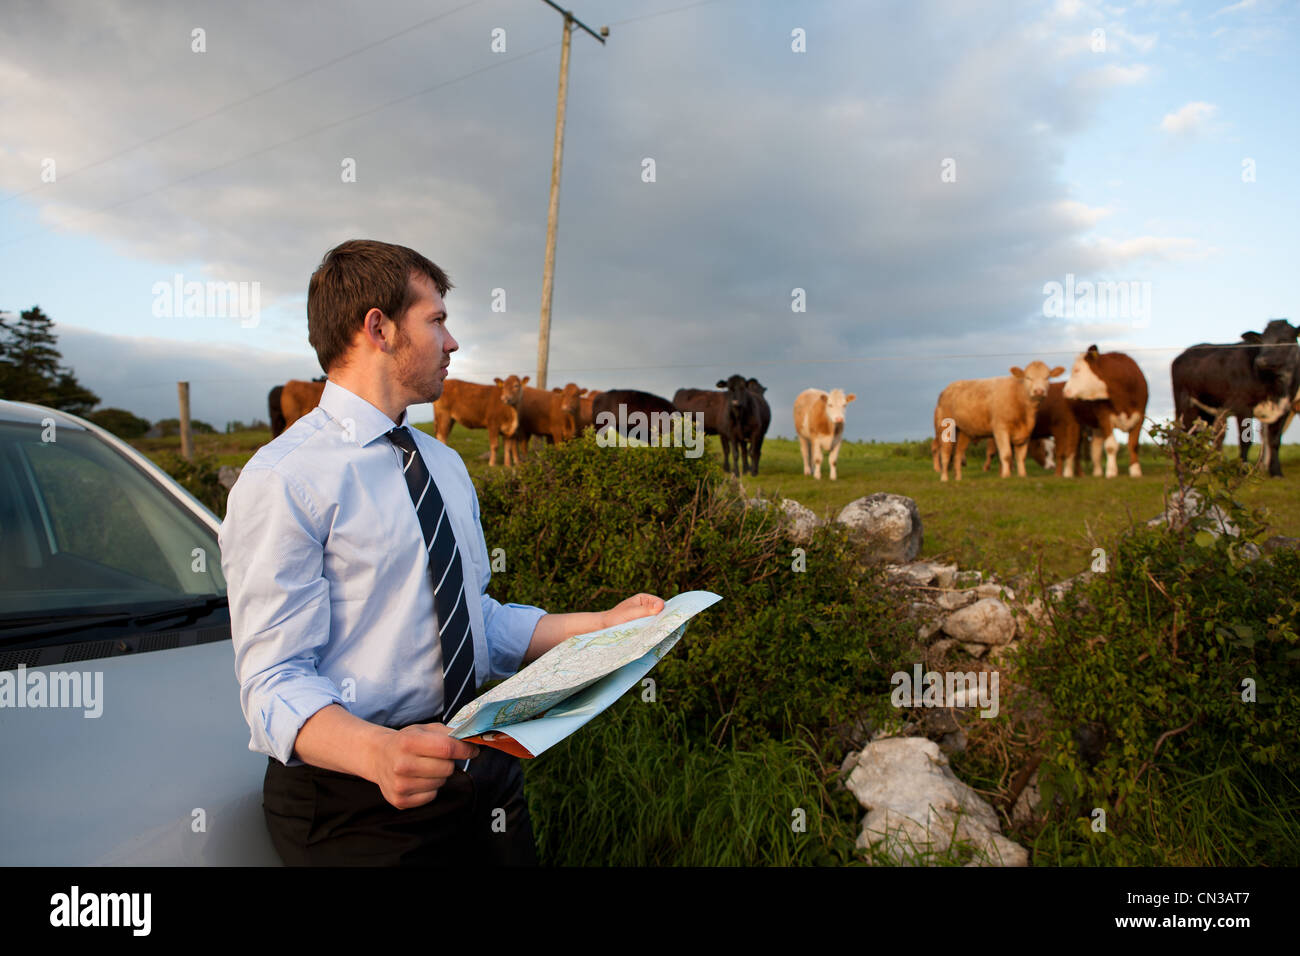 Businessman reading map in rural area Stock Photo